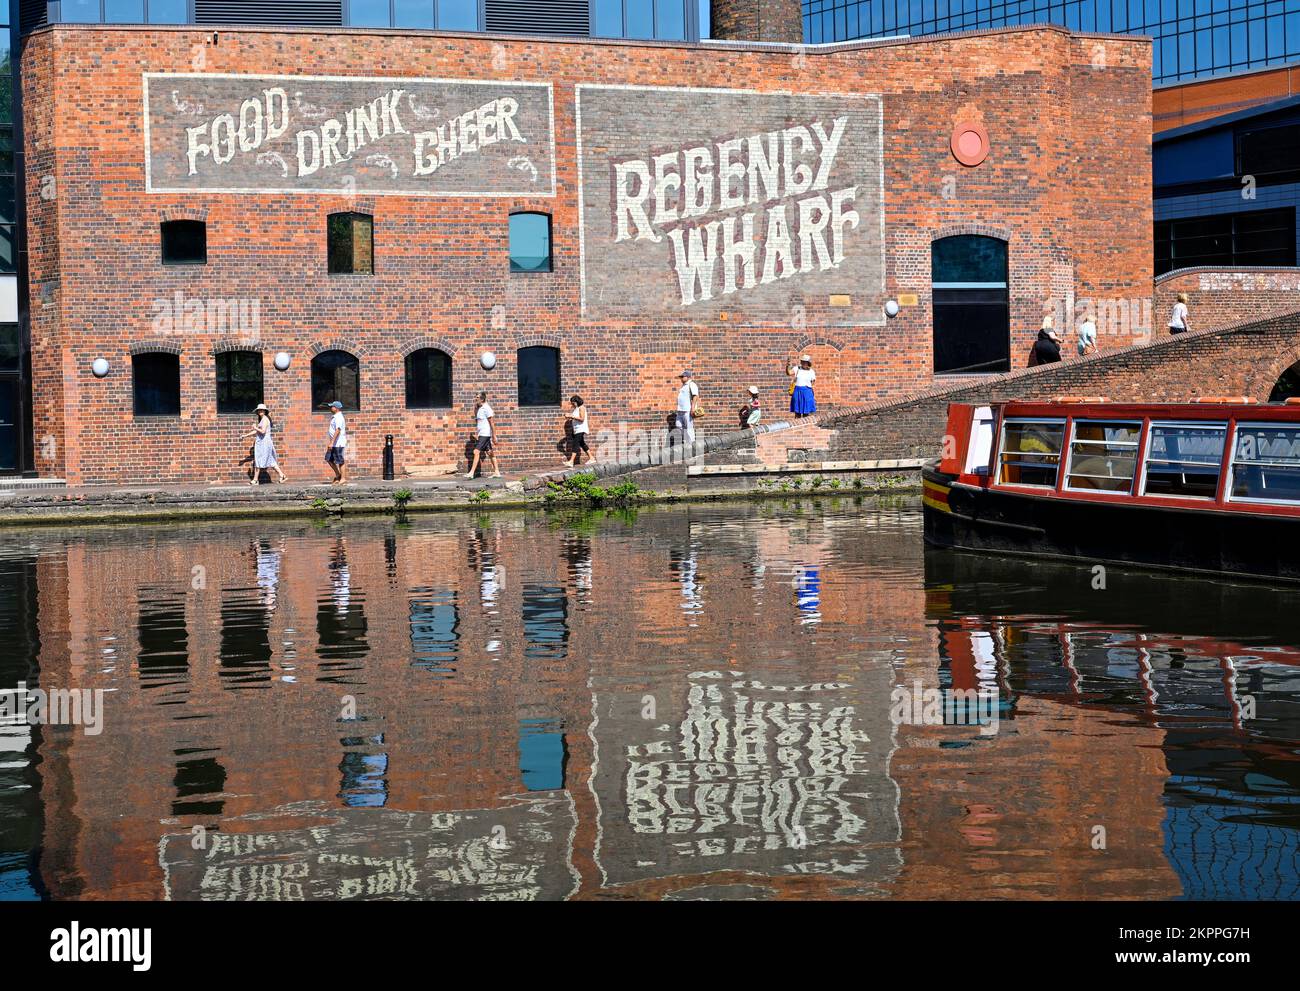 Regency Wharf at the Gas Street Basin in the centre of Birmingham UK and part of the cities waterways Stock Photo